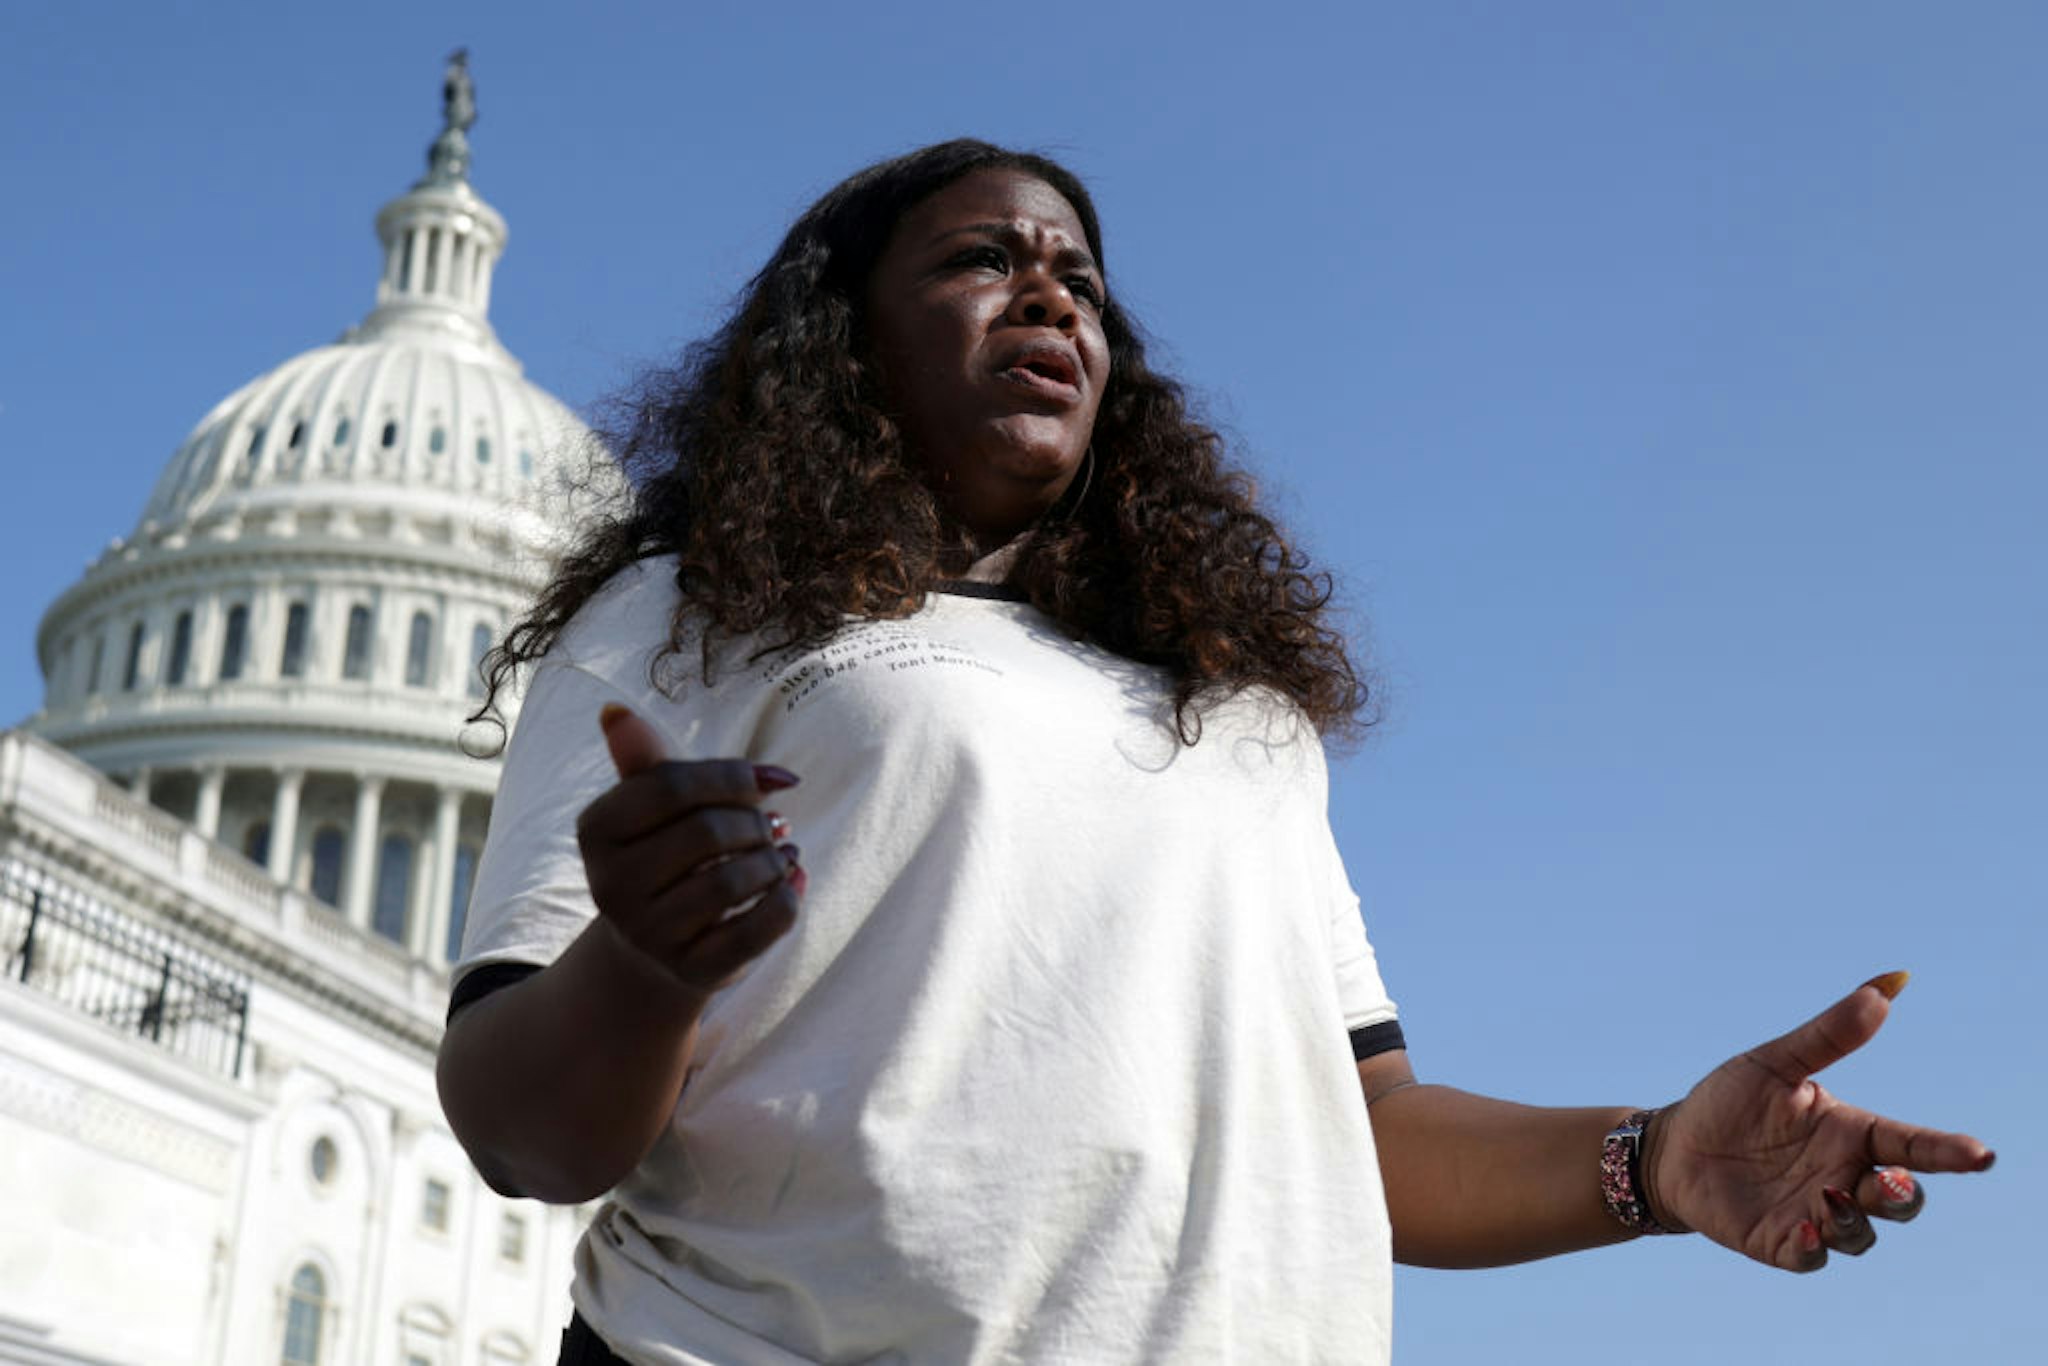 U.S. Cori Bush (D-MO) speaks to a reporter outside the U.S. Capitol August 2, 2021 in Washington, DC. Rep. Bush has been camping out at the front steps of the U.S. Capitol to protest the ending of the eviction moratorium.